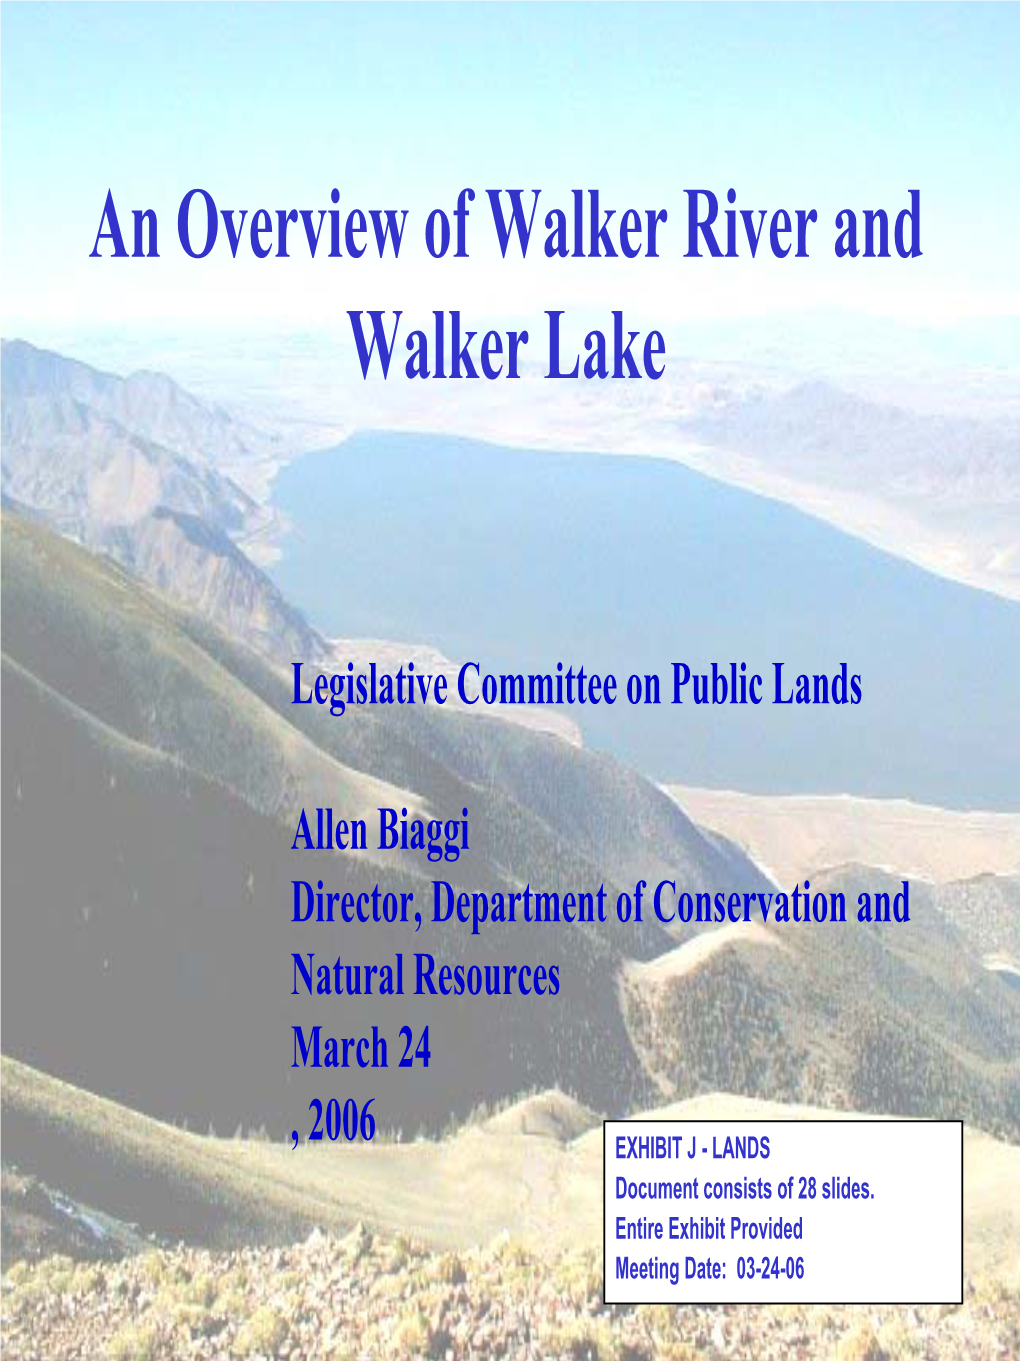 An Overview of Walker River and Walker Lake